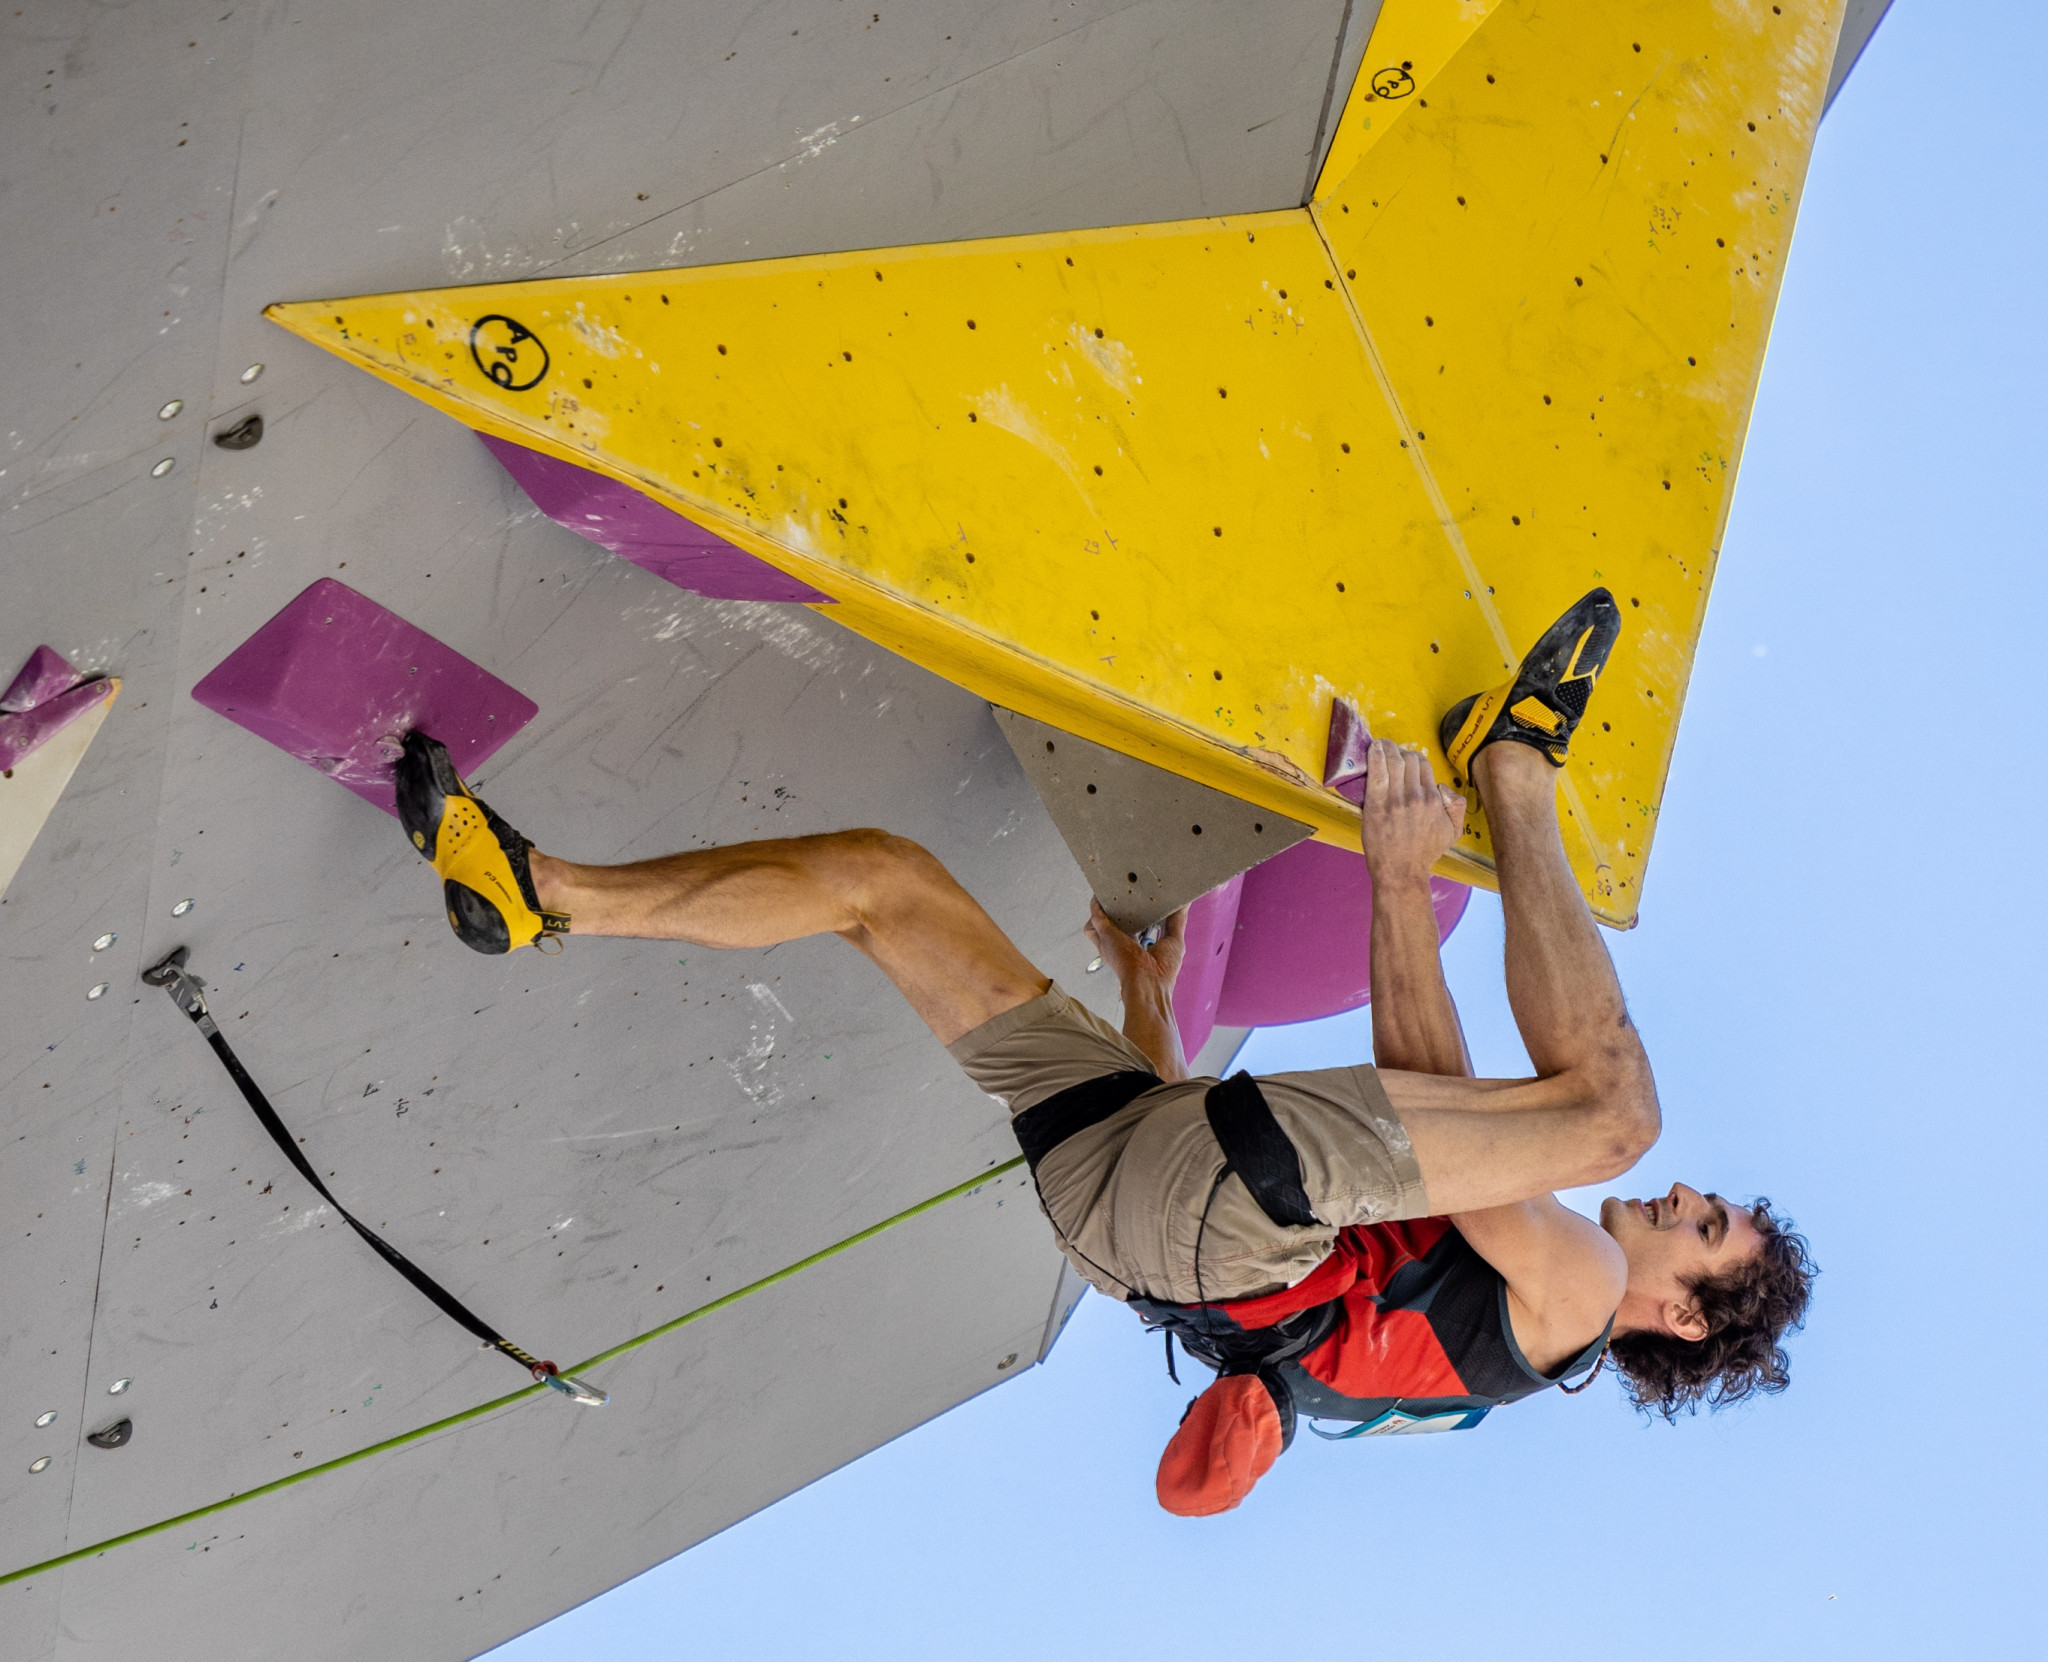 The Czech Republic's Adam Ondra claimed his 23rd gold medal in the IFSC World Cup with victory in Briançon ©IFSC